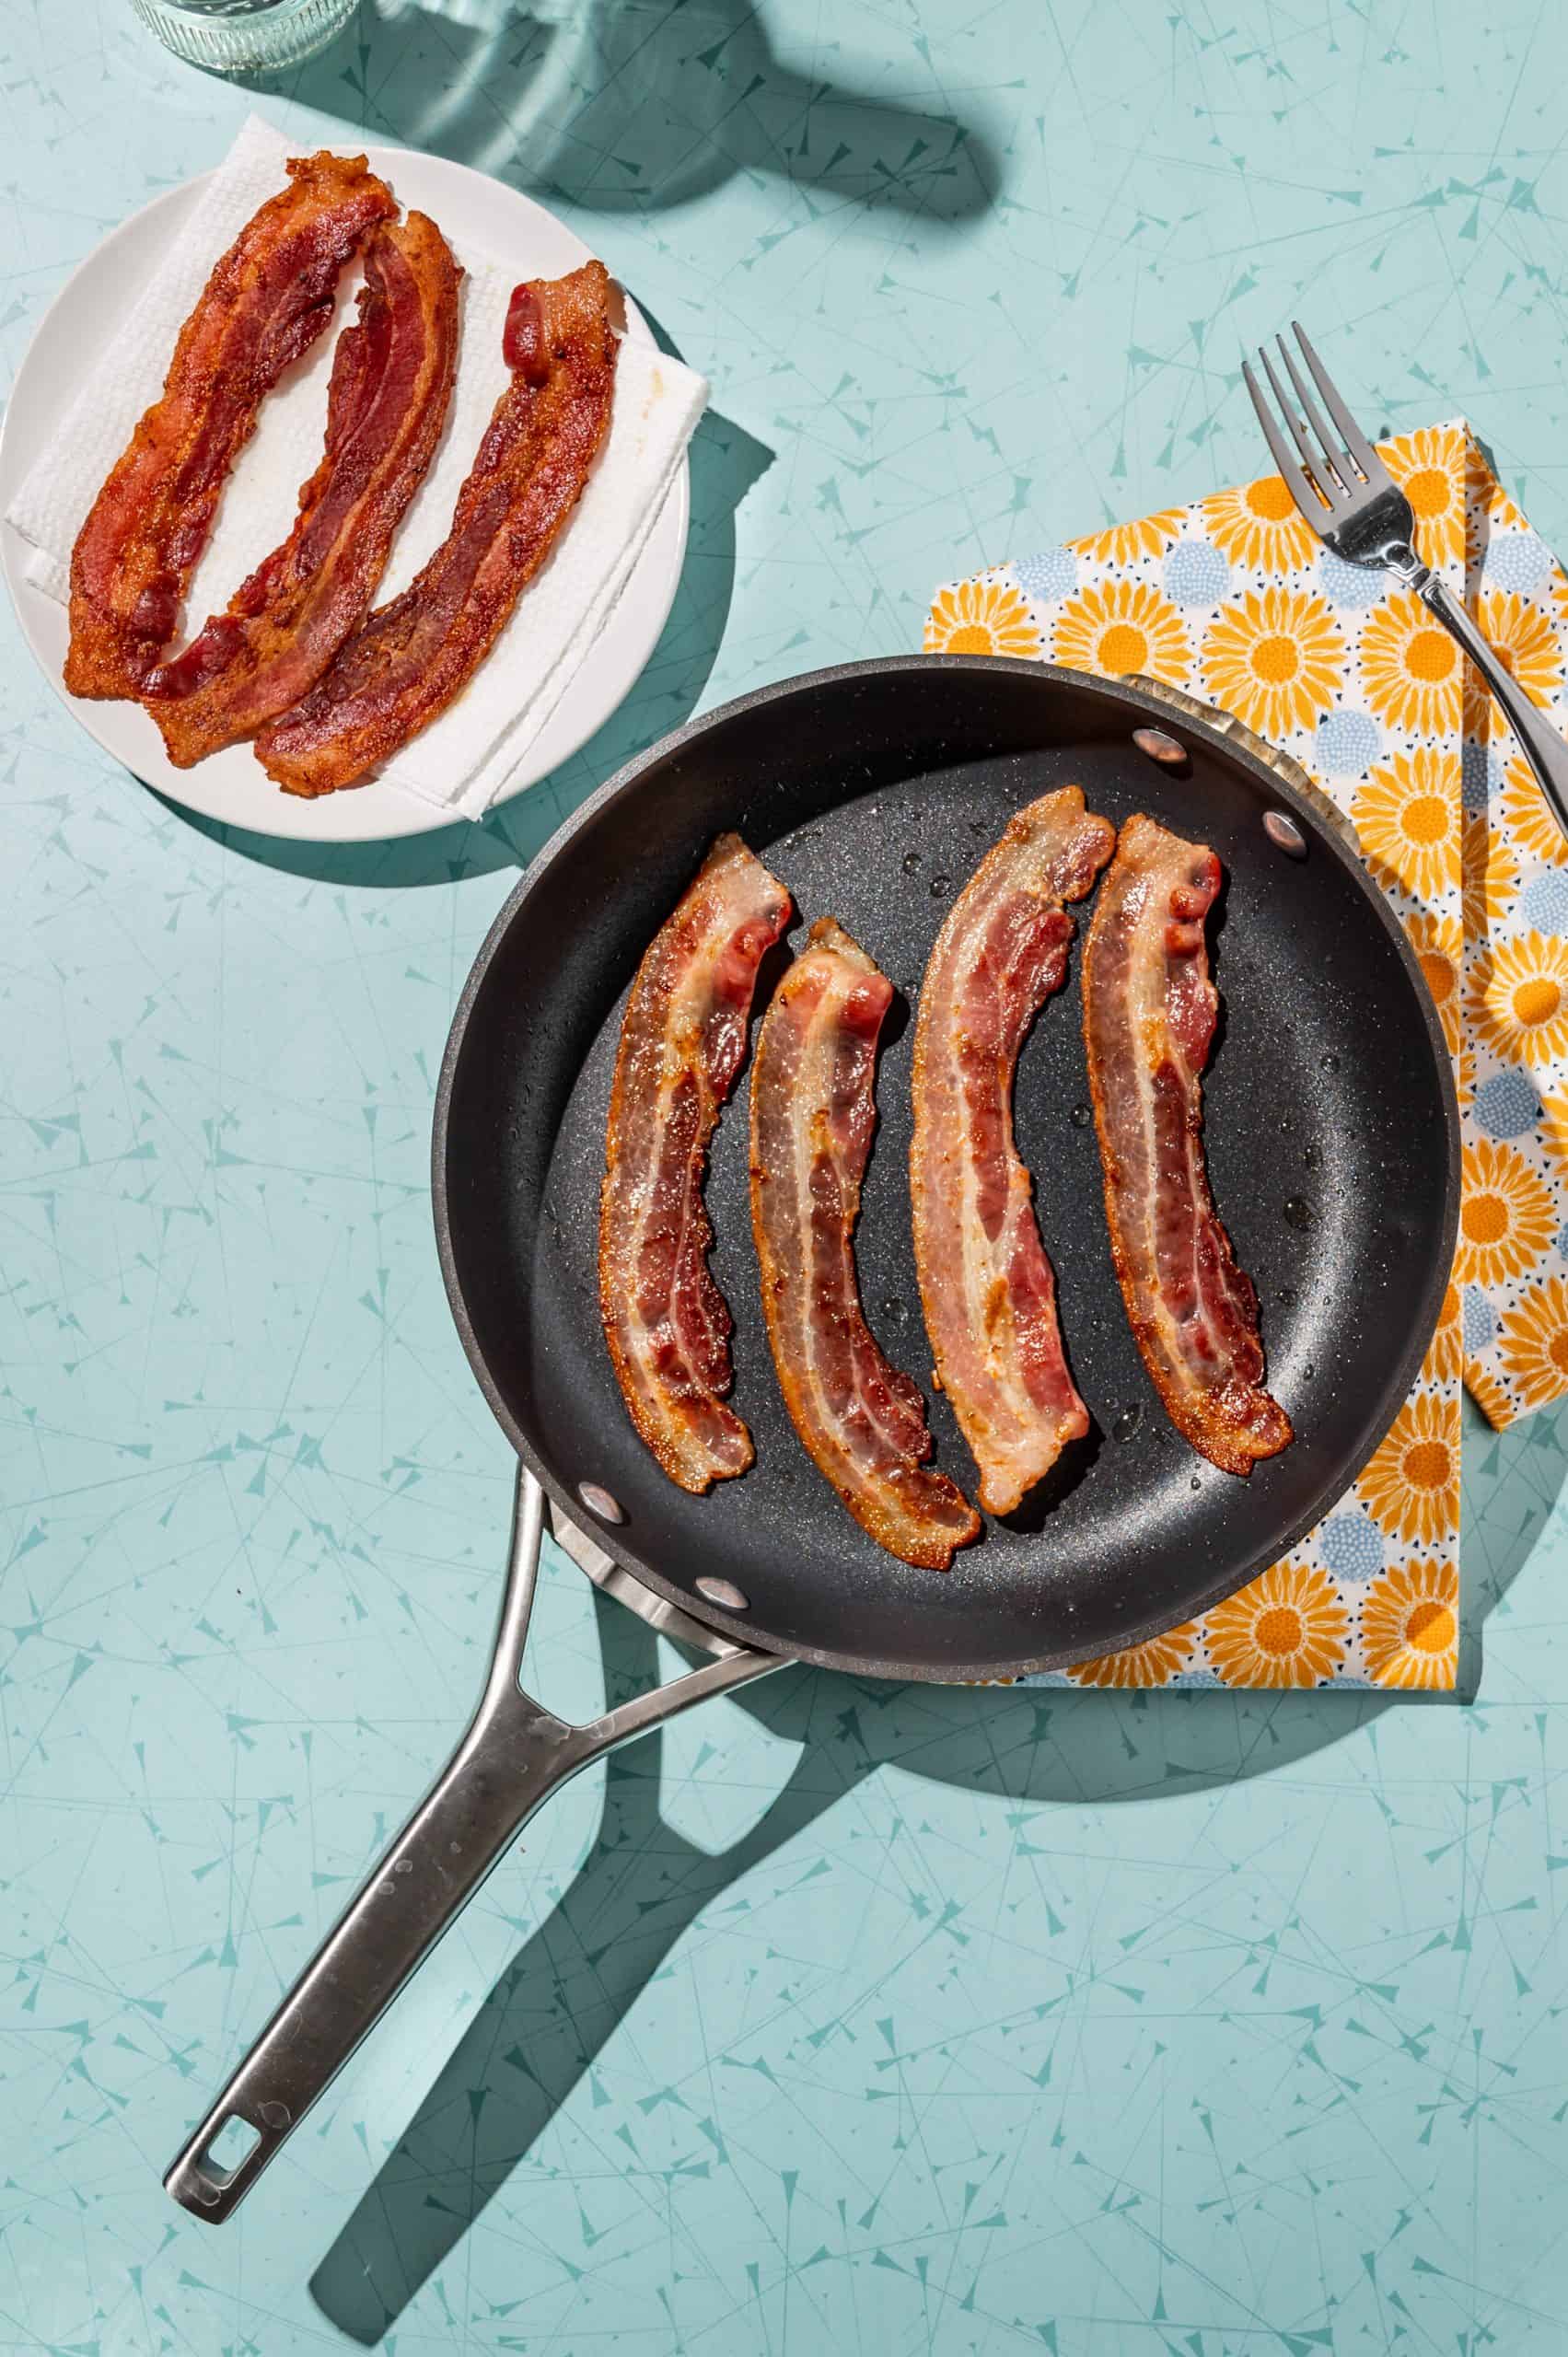 4 strips of bacon pan frying in a skillet, plate of cooked bacon on the side